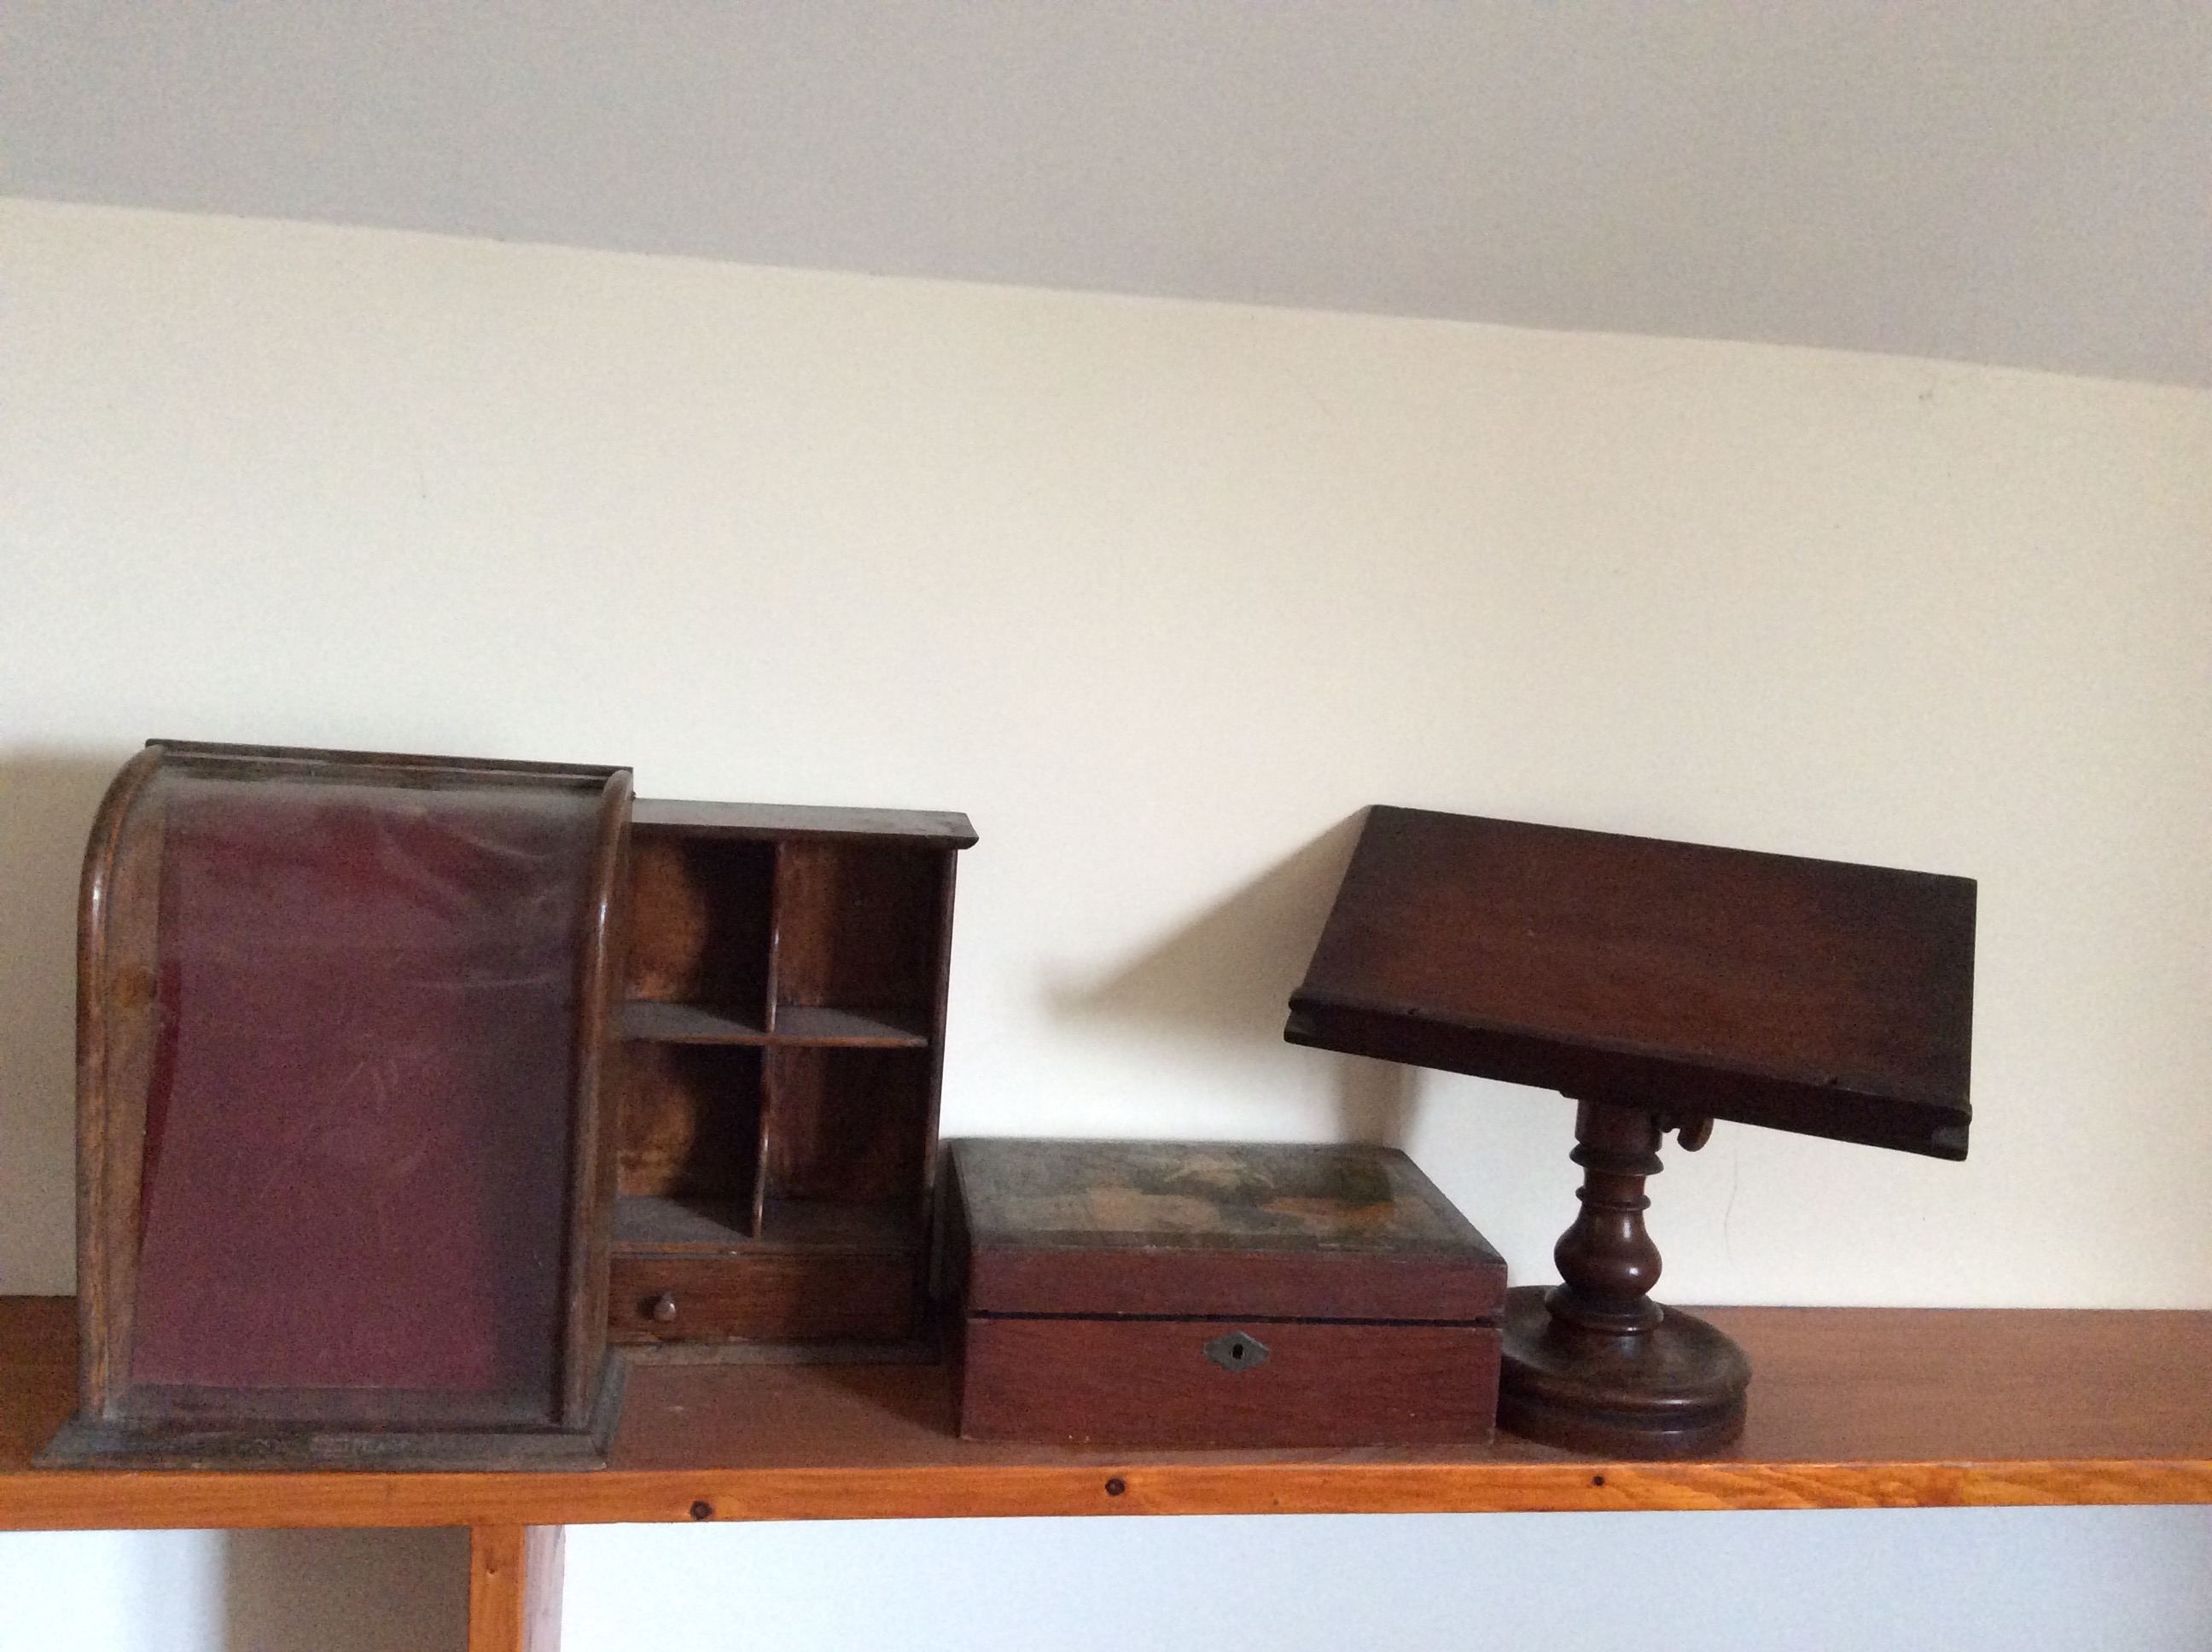 A writing box, display case, lecturn and a miniature dresser